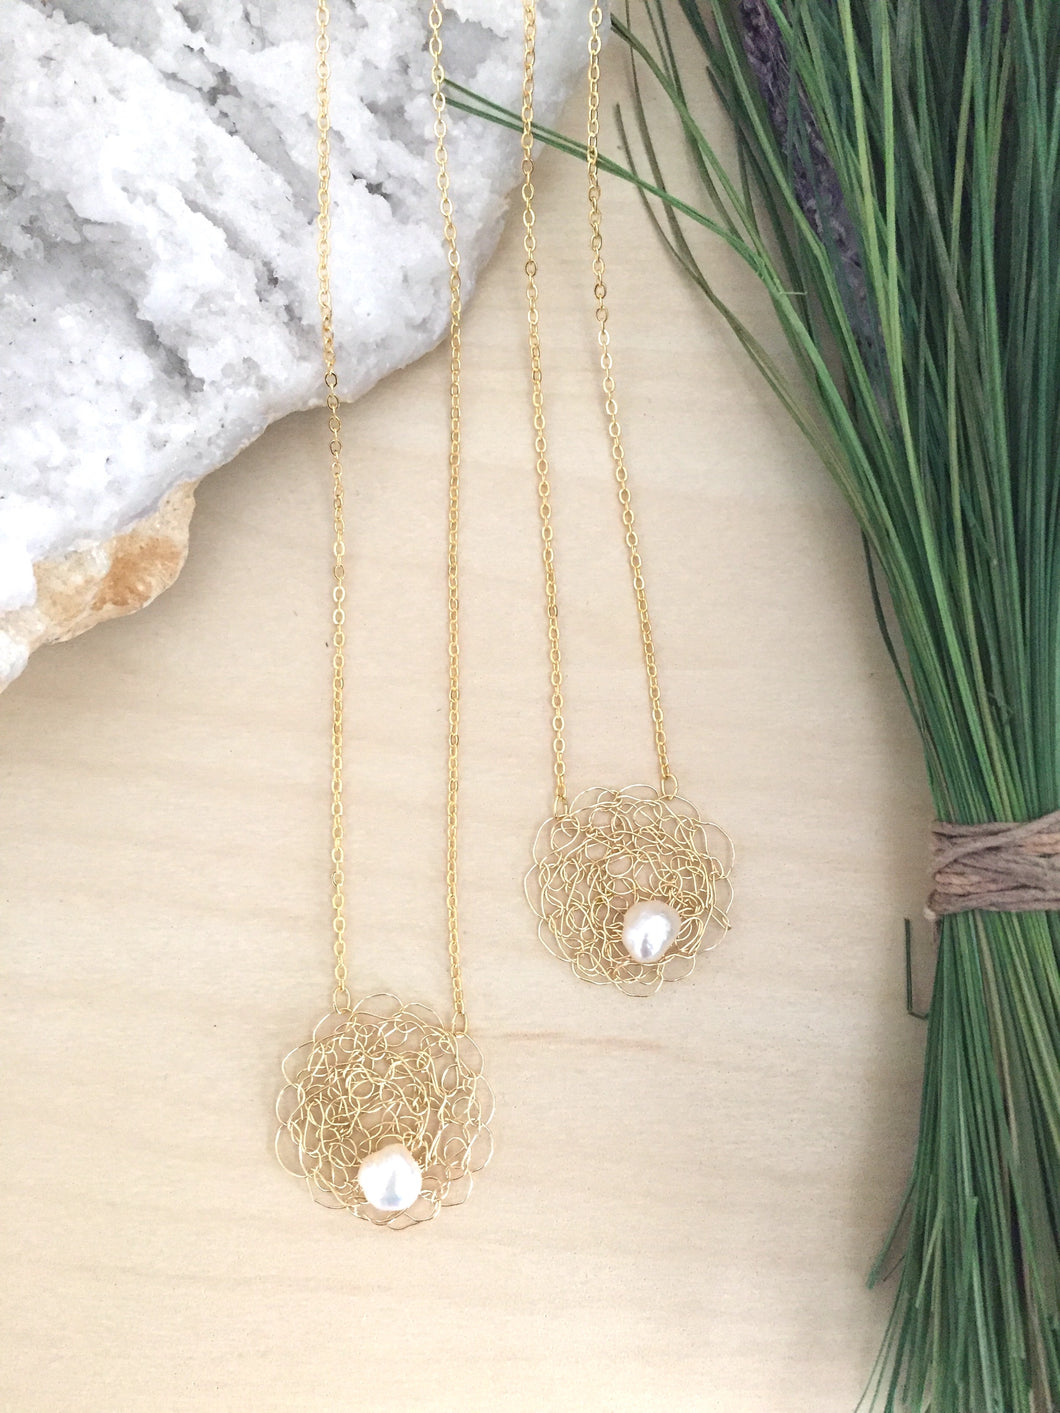 Wire Crochet Sarah Necklace -Delicate Lacy Woven Wire Pendant with Freshwater Pearls